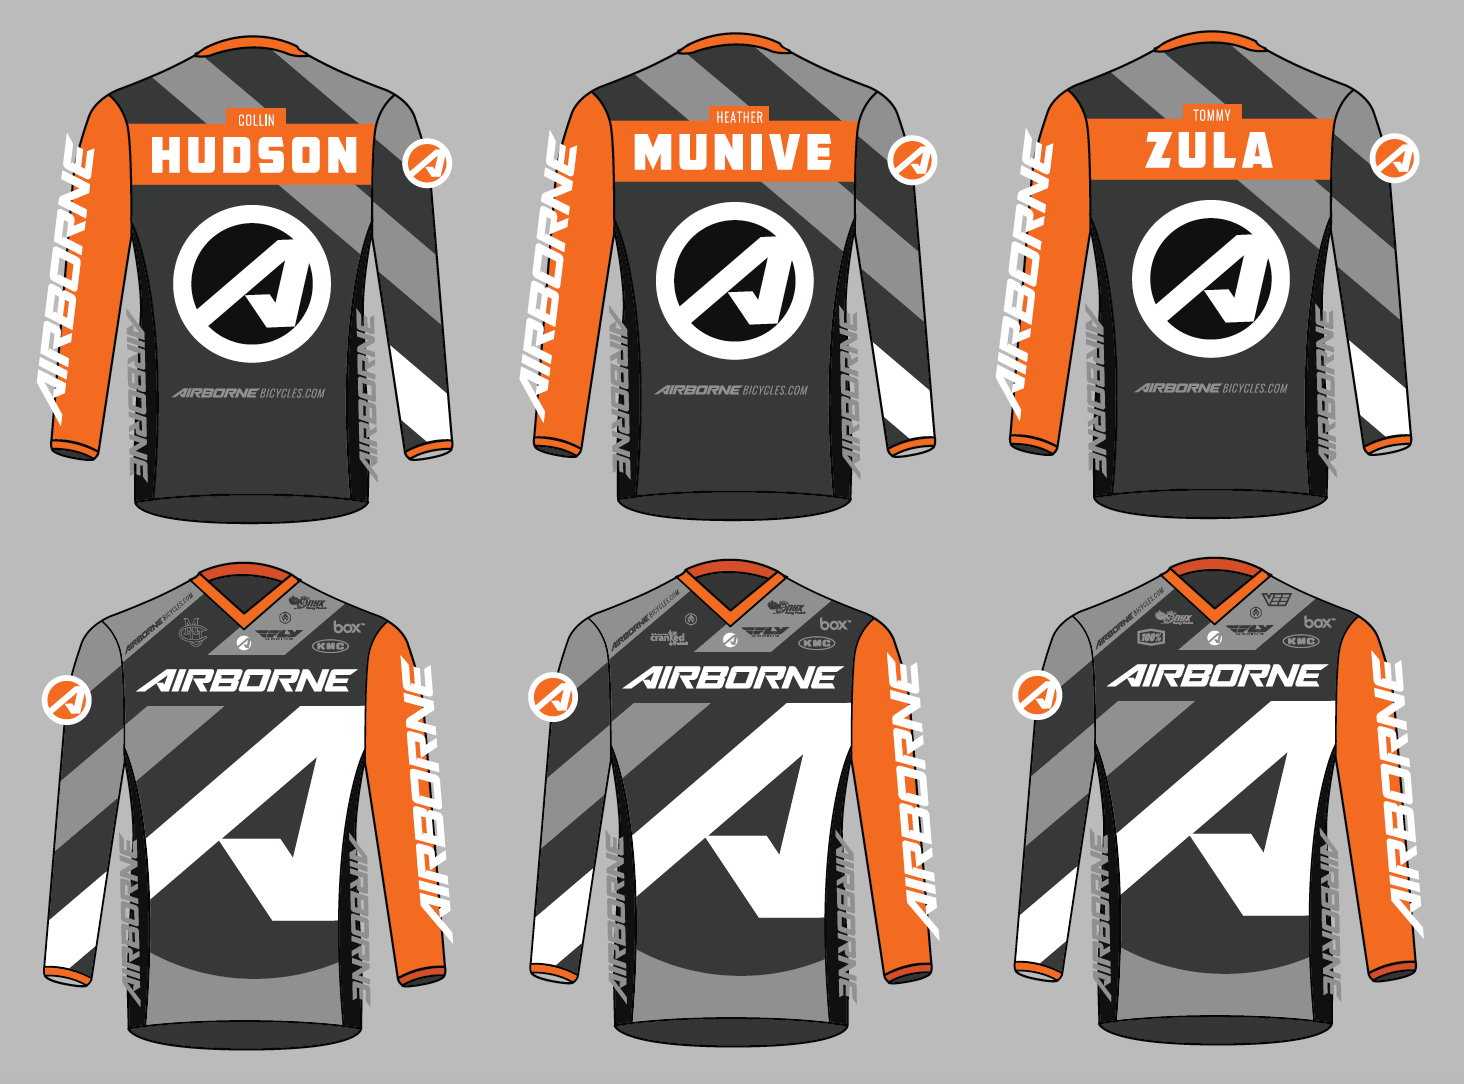 New Jerseys For Sea Otter!